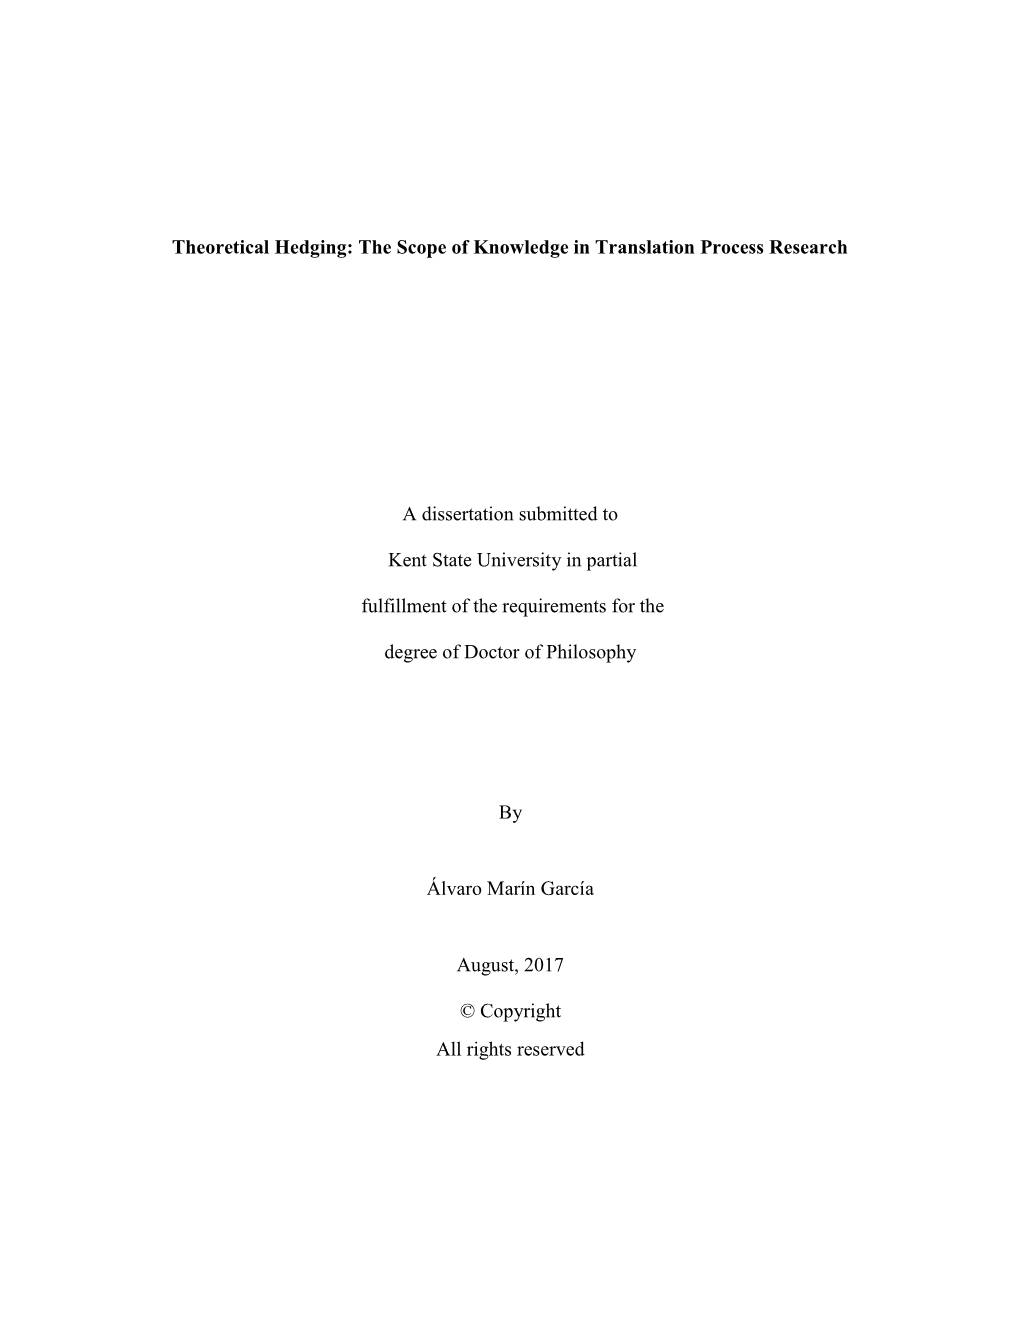 Theoretical Hedging: the Scope of Knowledge in Translation Process Research